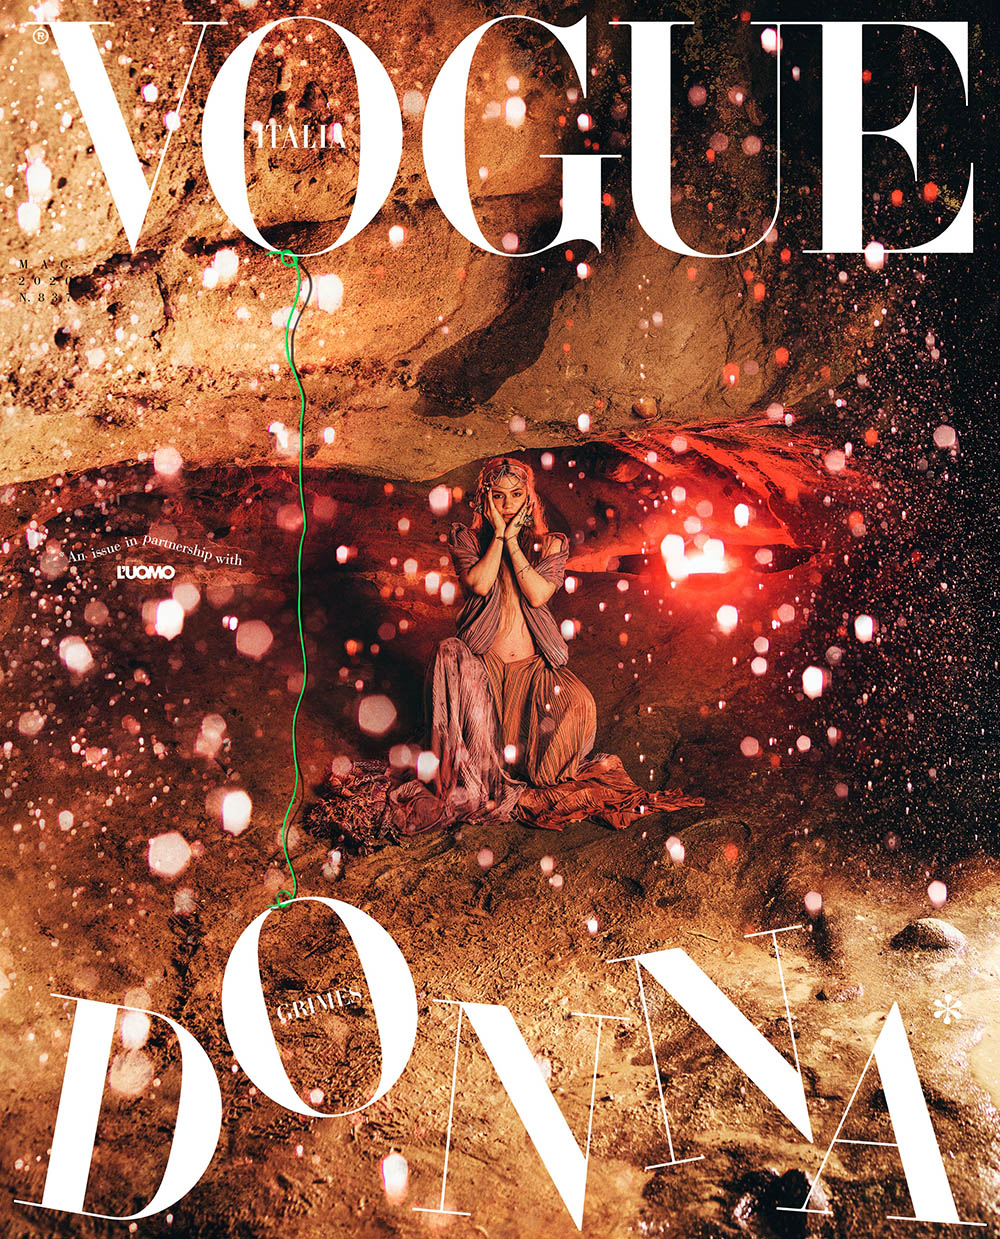 Grimes covers Vogue Italia May 2020 by Ryan McGinley